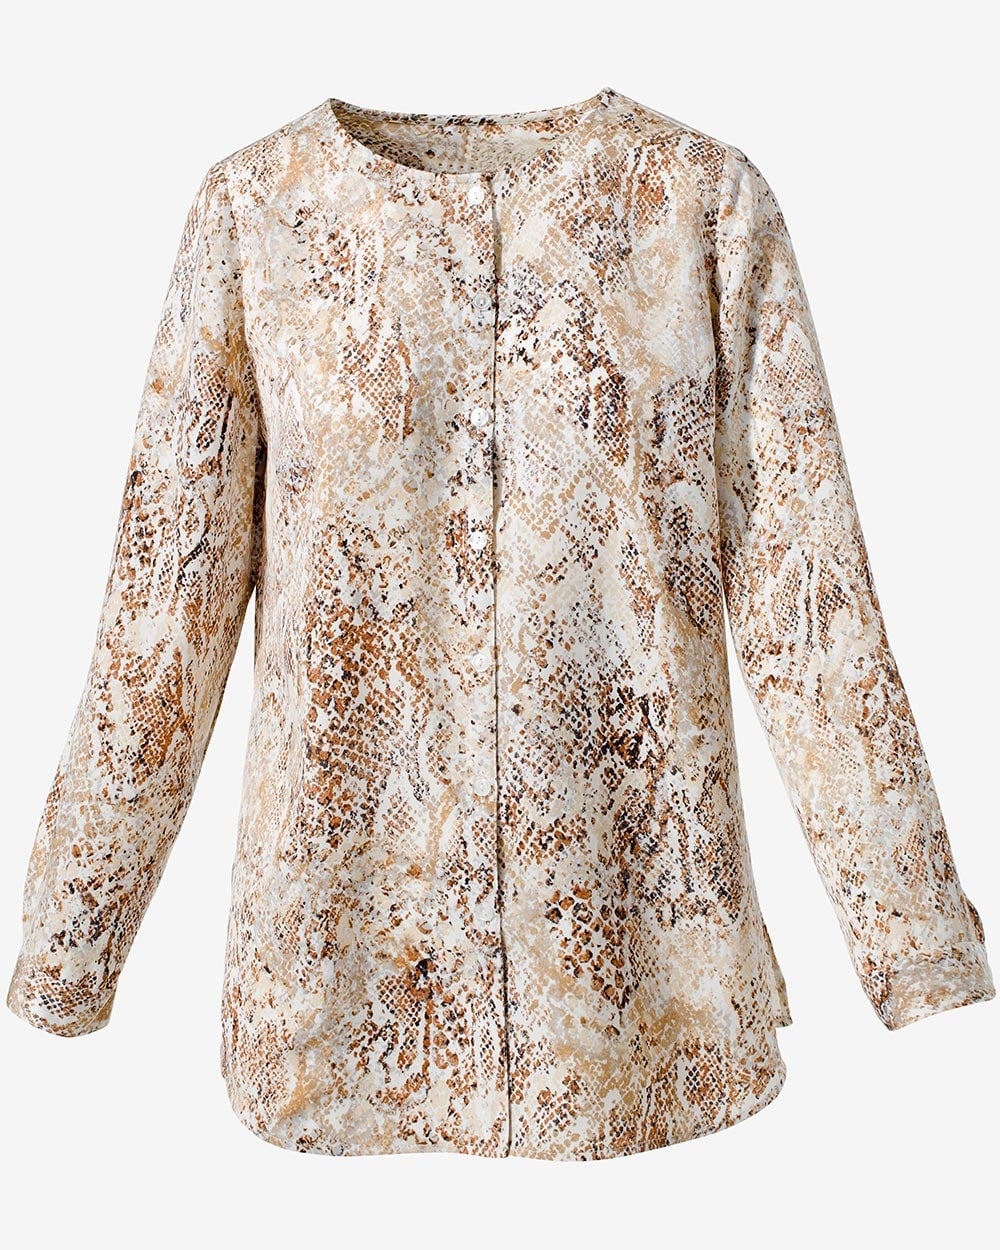 The Silky Chic Neutral Python Tunic